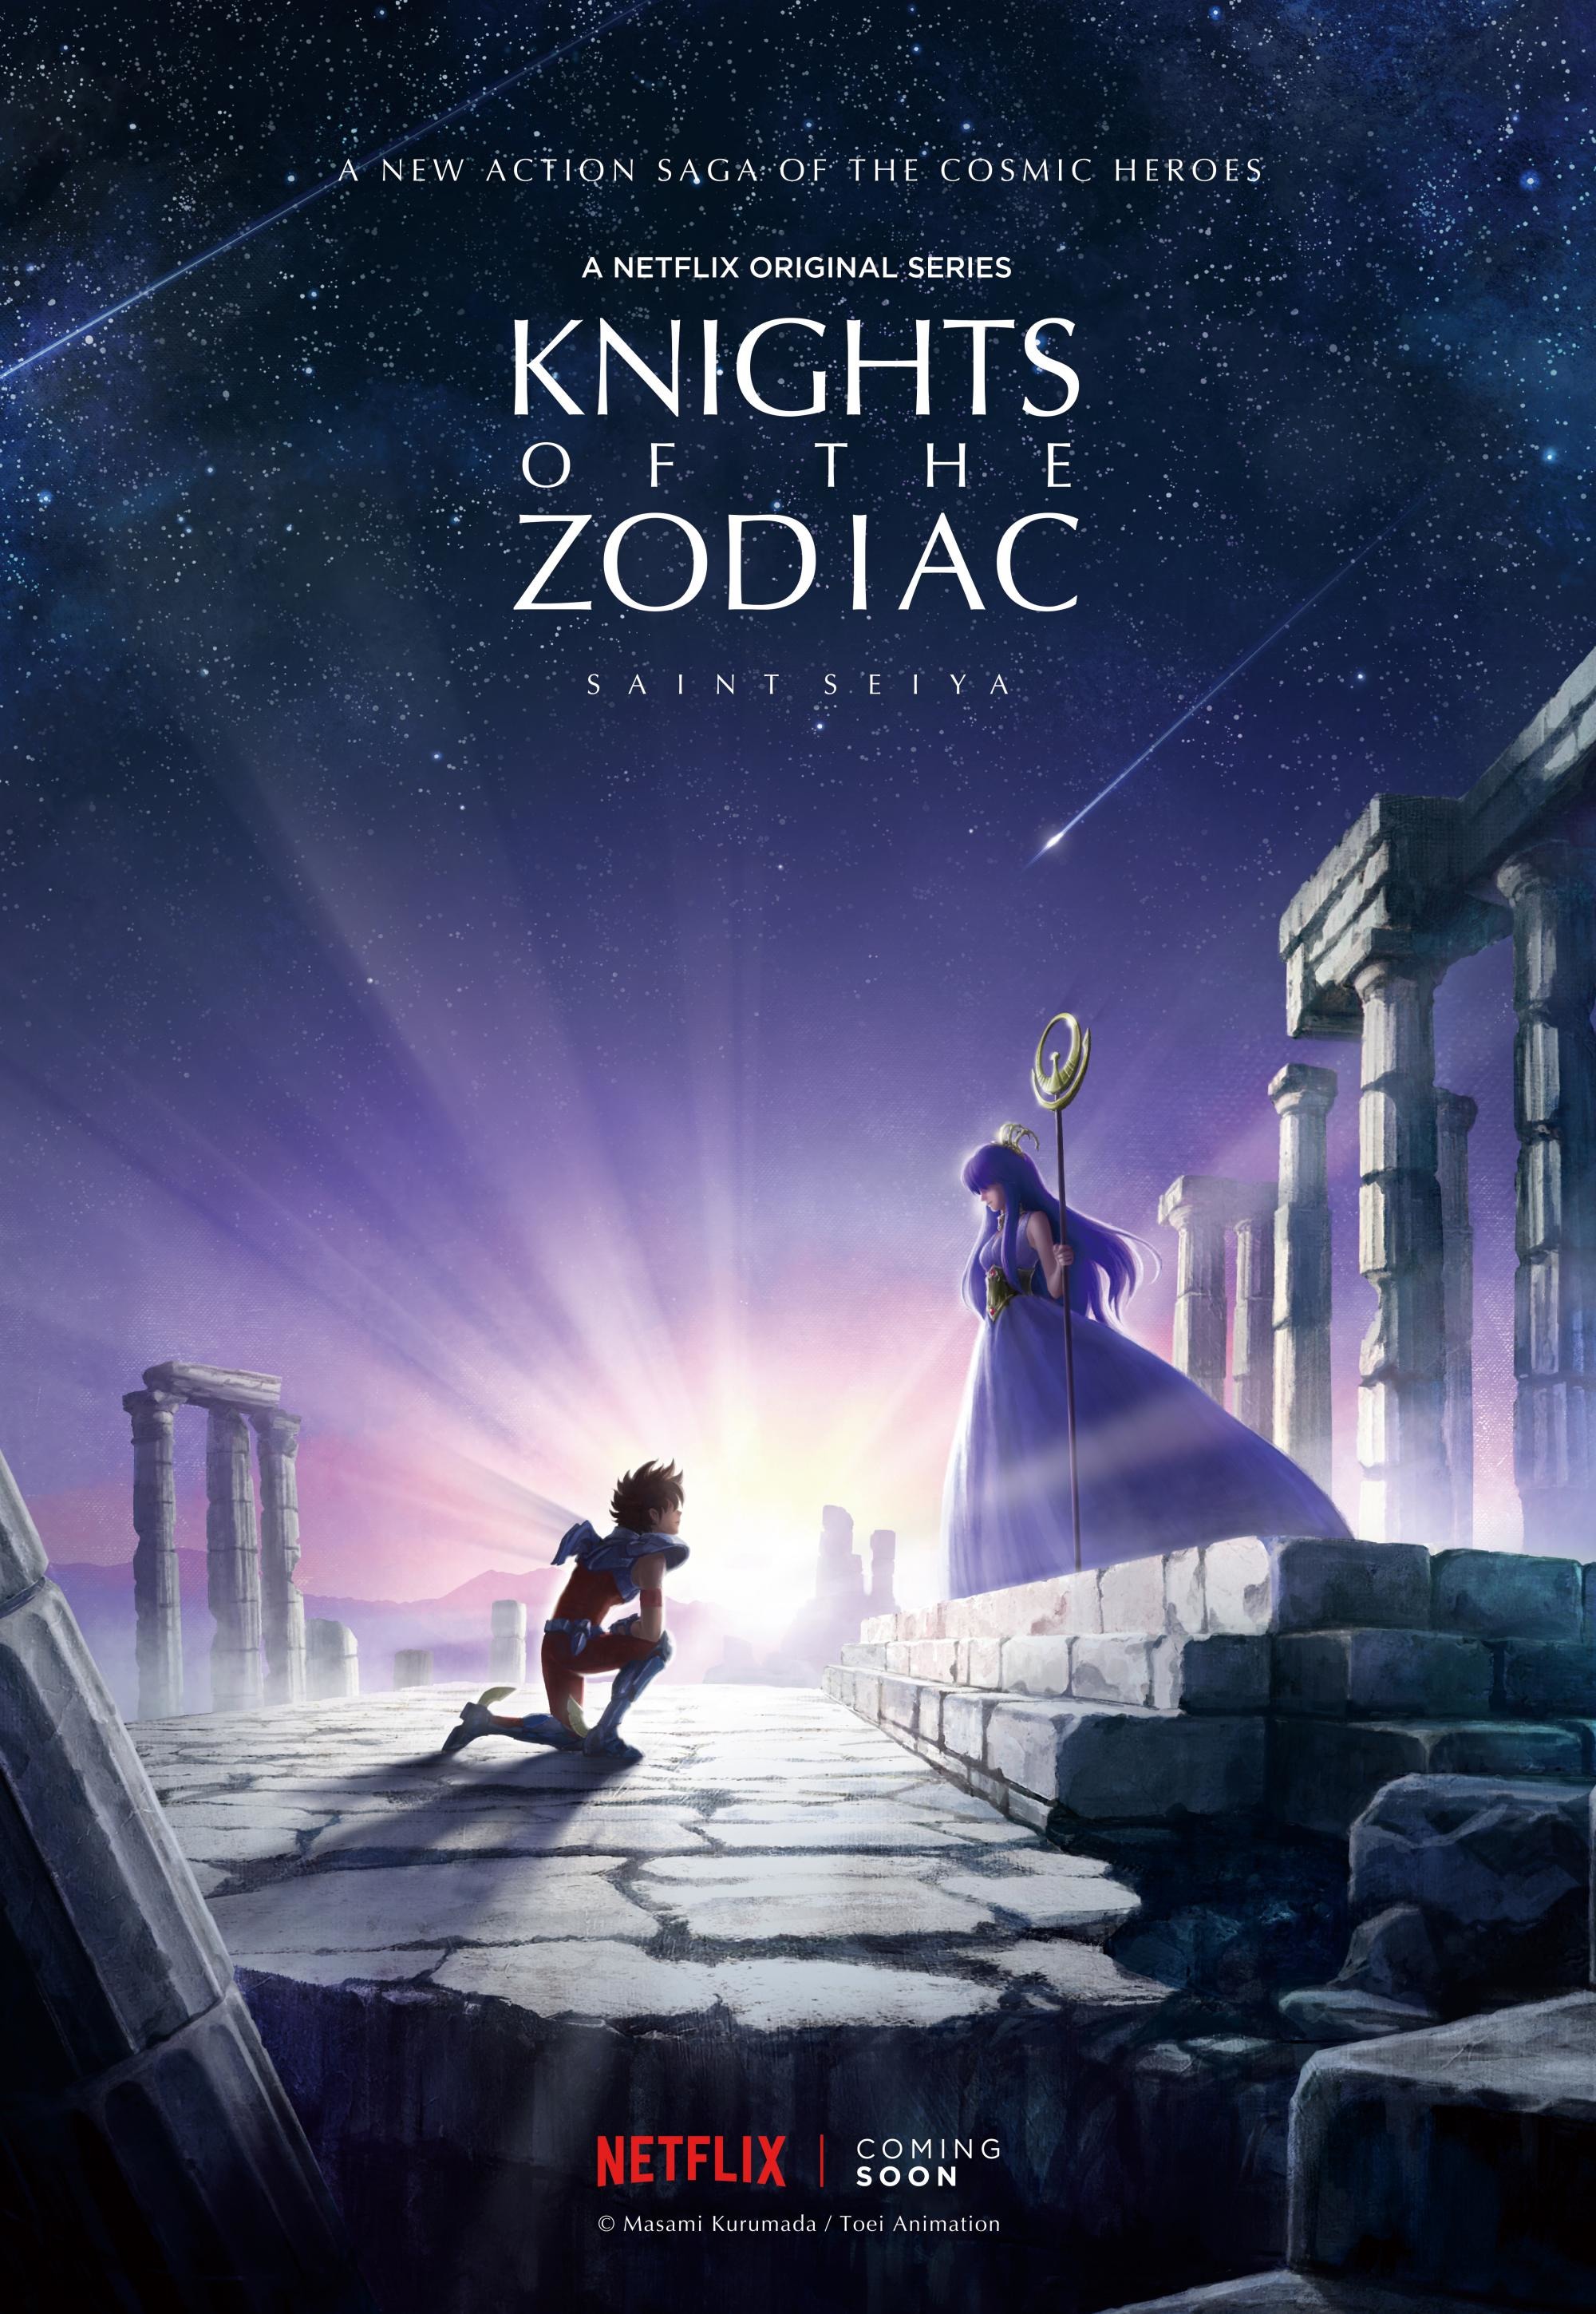 Mega Sized TV Poster Image for Saint Seiya: Knights of the Zodiac (#1 of 2)